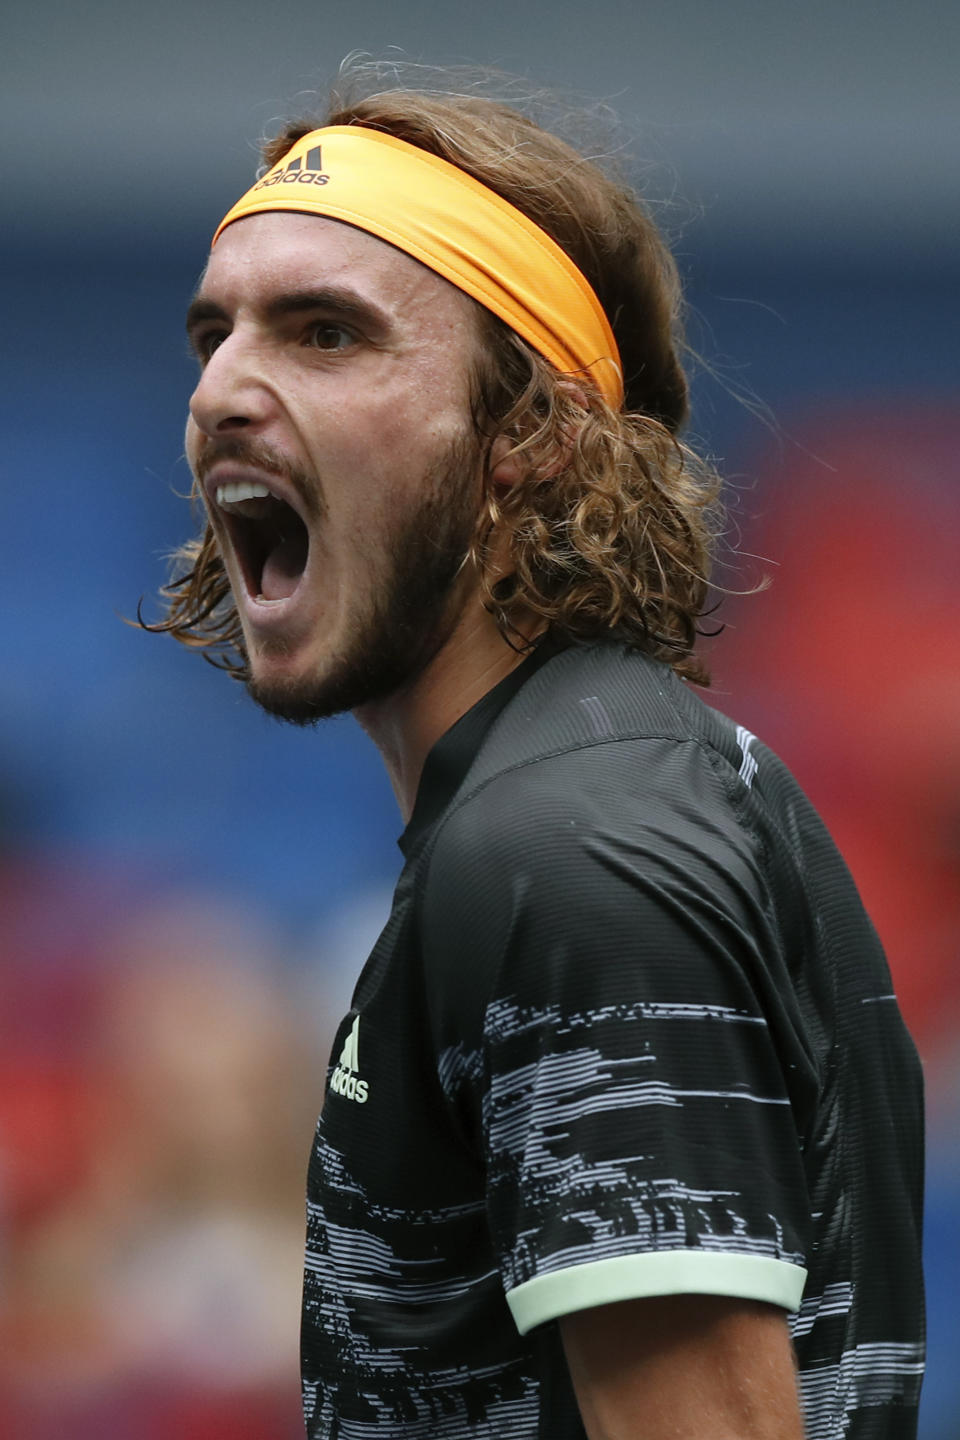 Stefanos Tsitsipas of Greece shouts after defeating Felix Auger-Aliassime of Canada in the men's singles match at the Shanghai Masters tennis tournament at Qizhong Forest Sports City Tennis Center in Shanghai, China, Wednesday, Oct. 9, 2019. (AP Photo/Andy Wong)